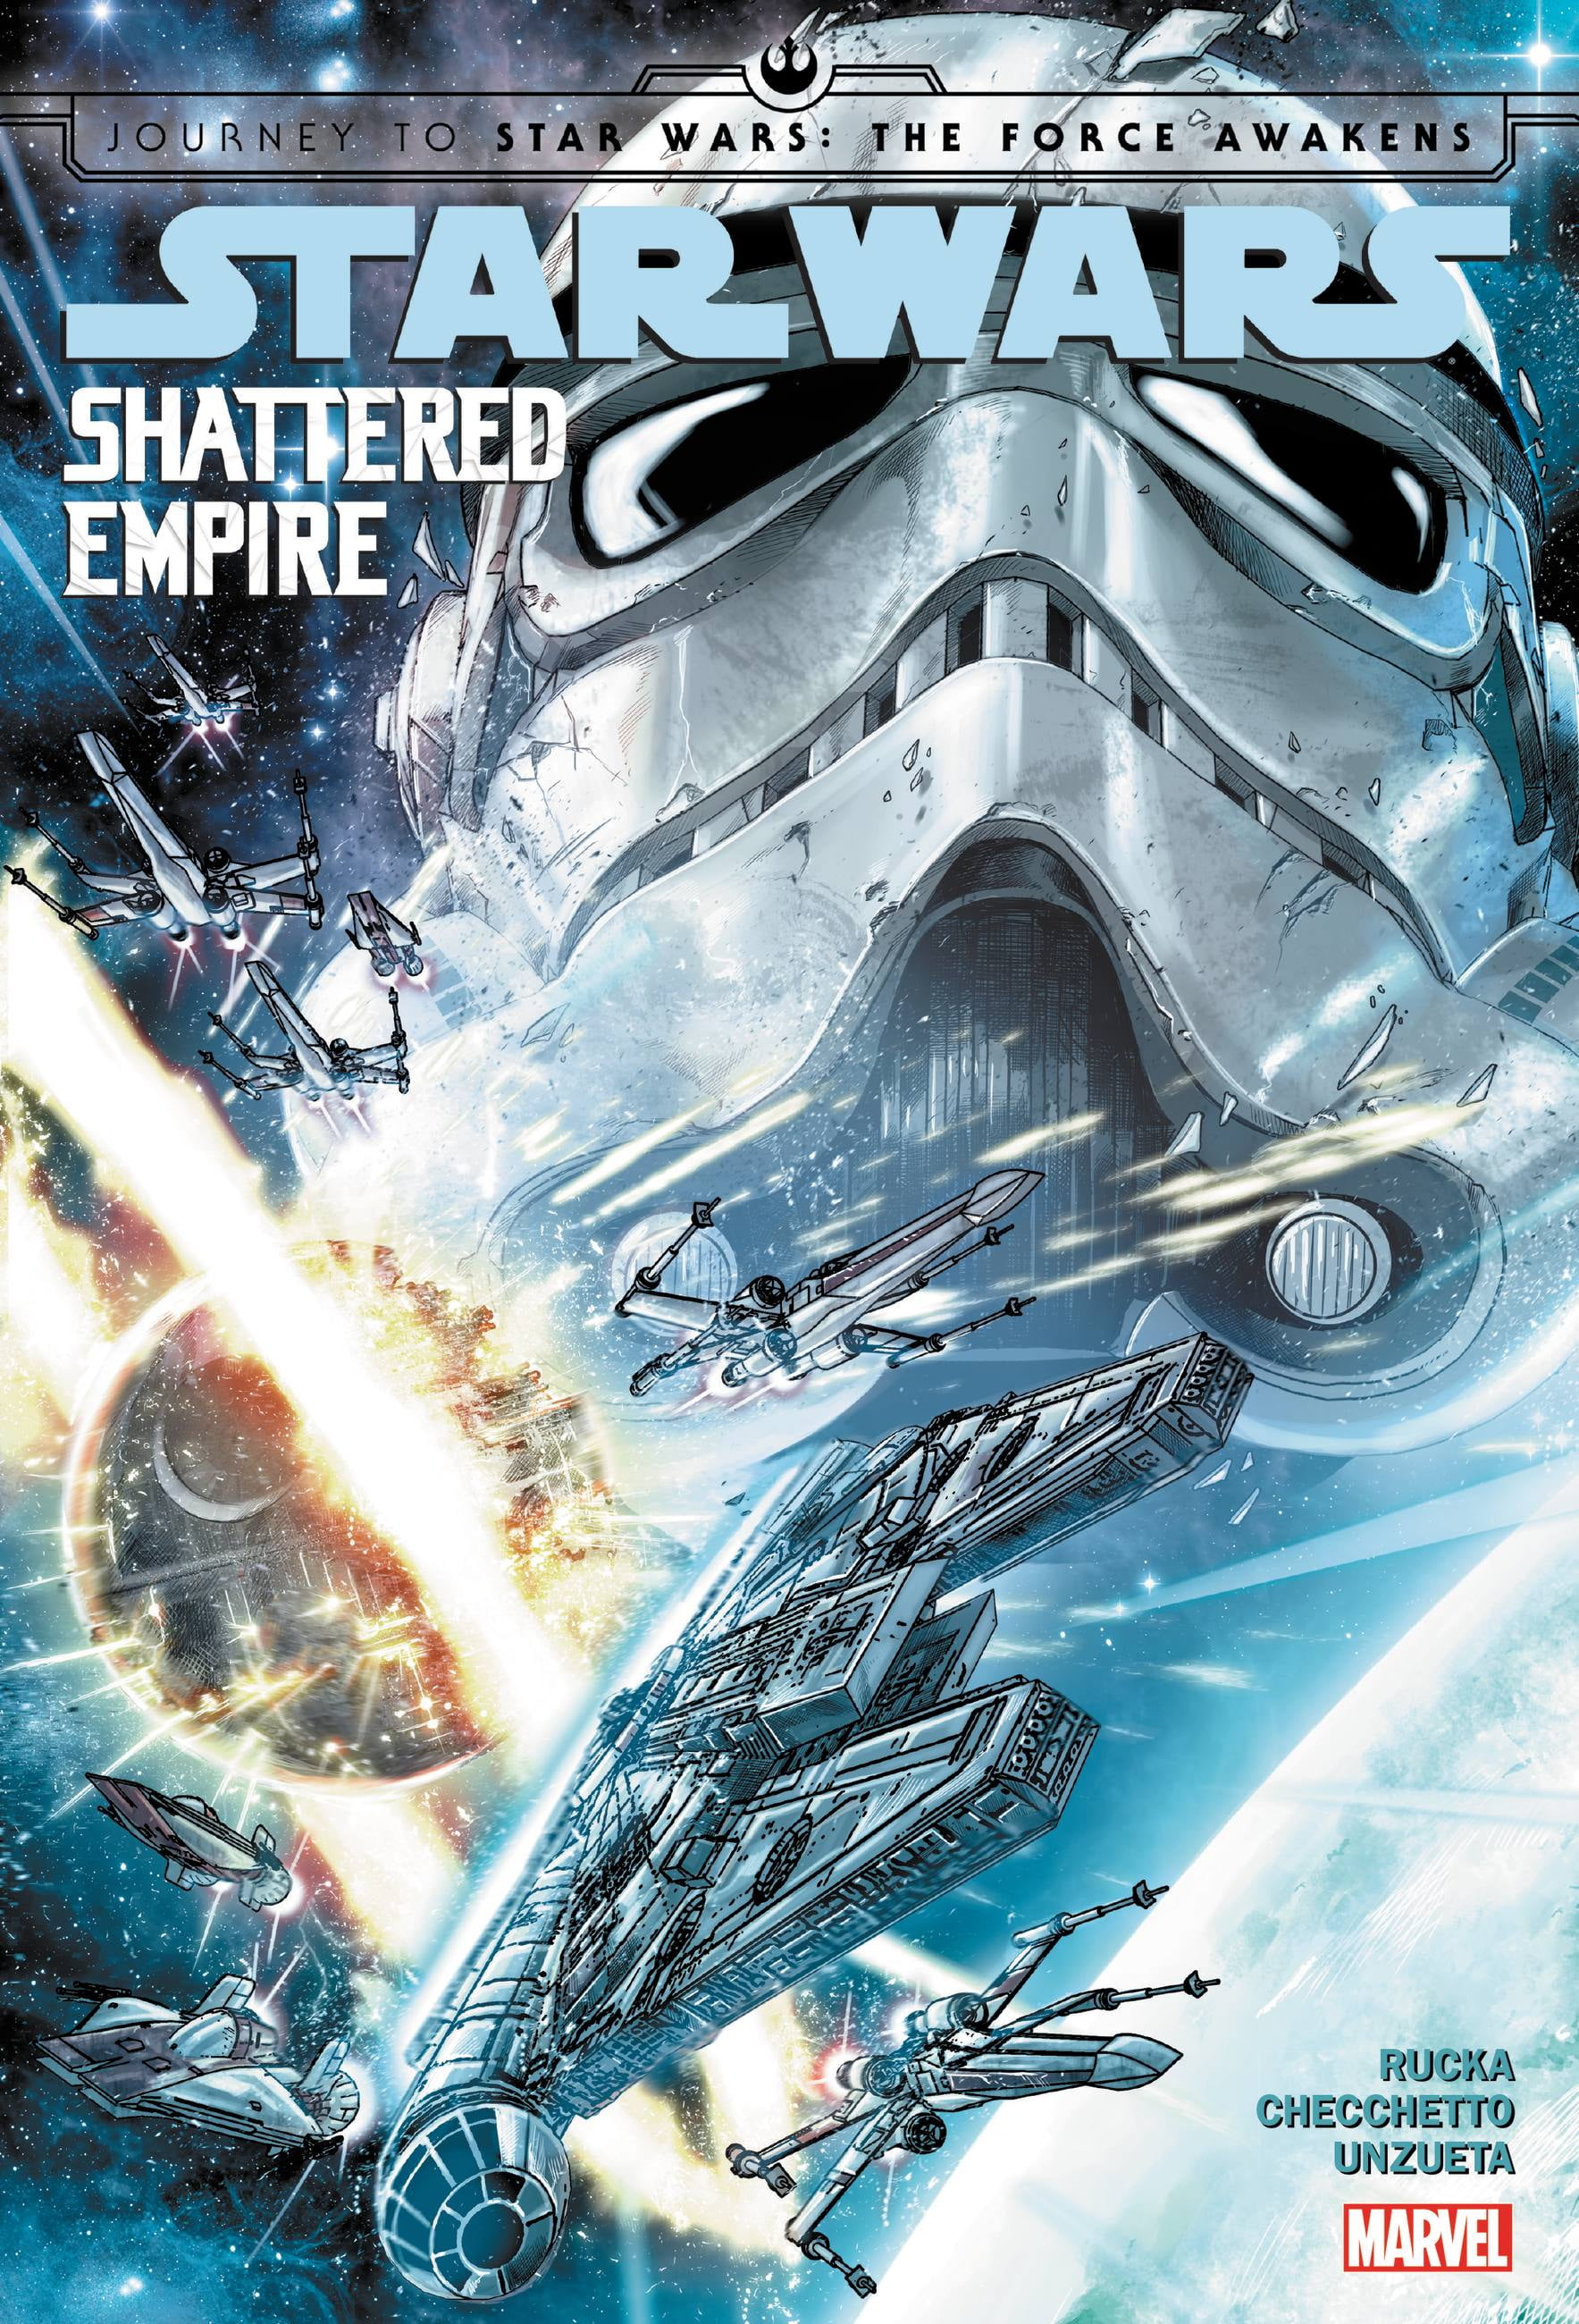 Shattered Empire #1 The Force Awakens Journey to Star Wars 